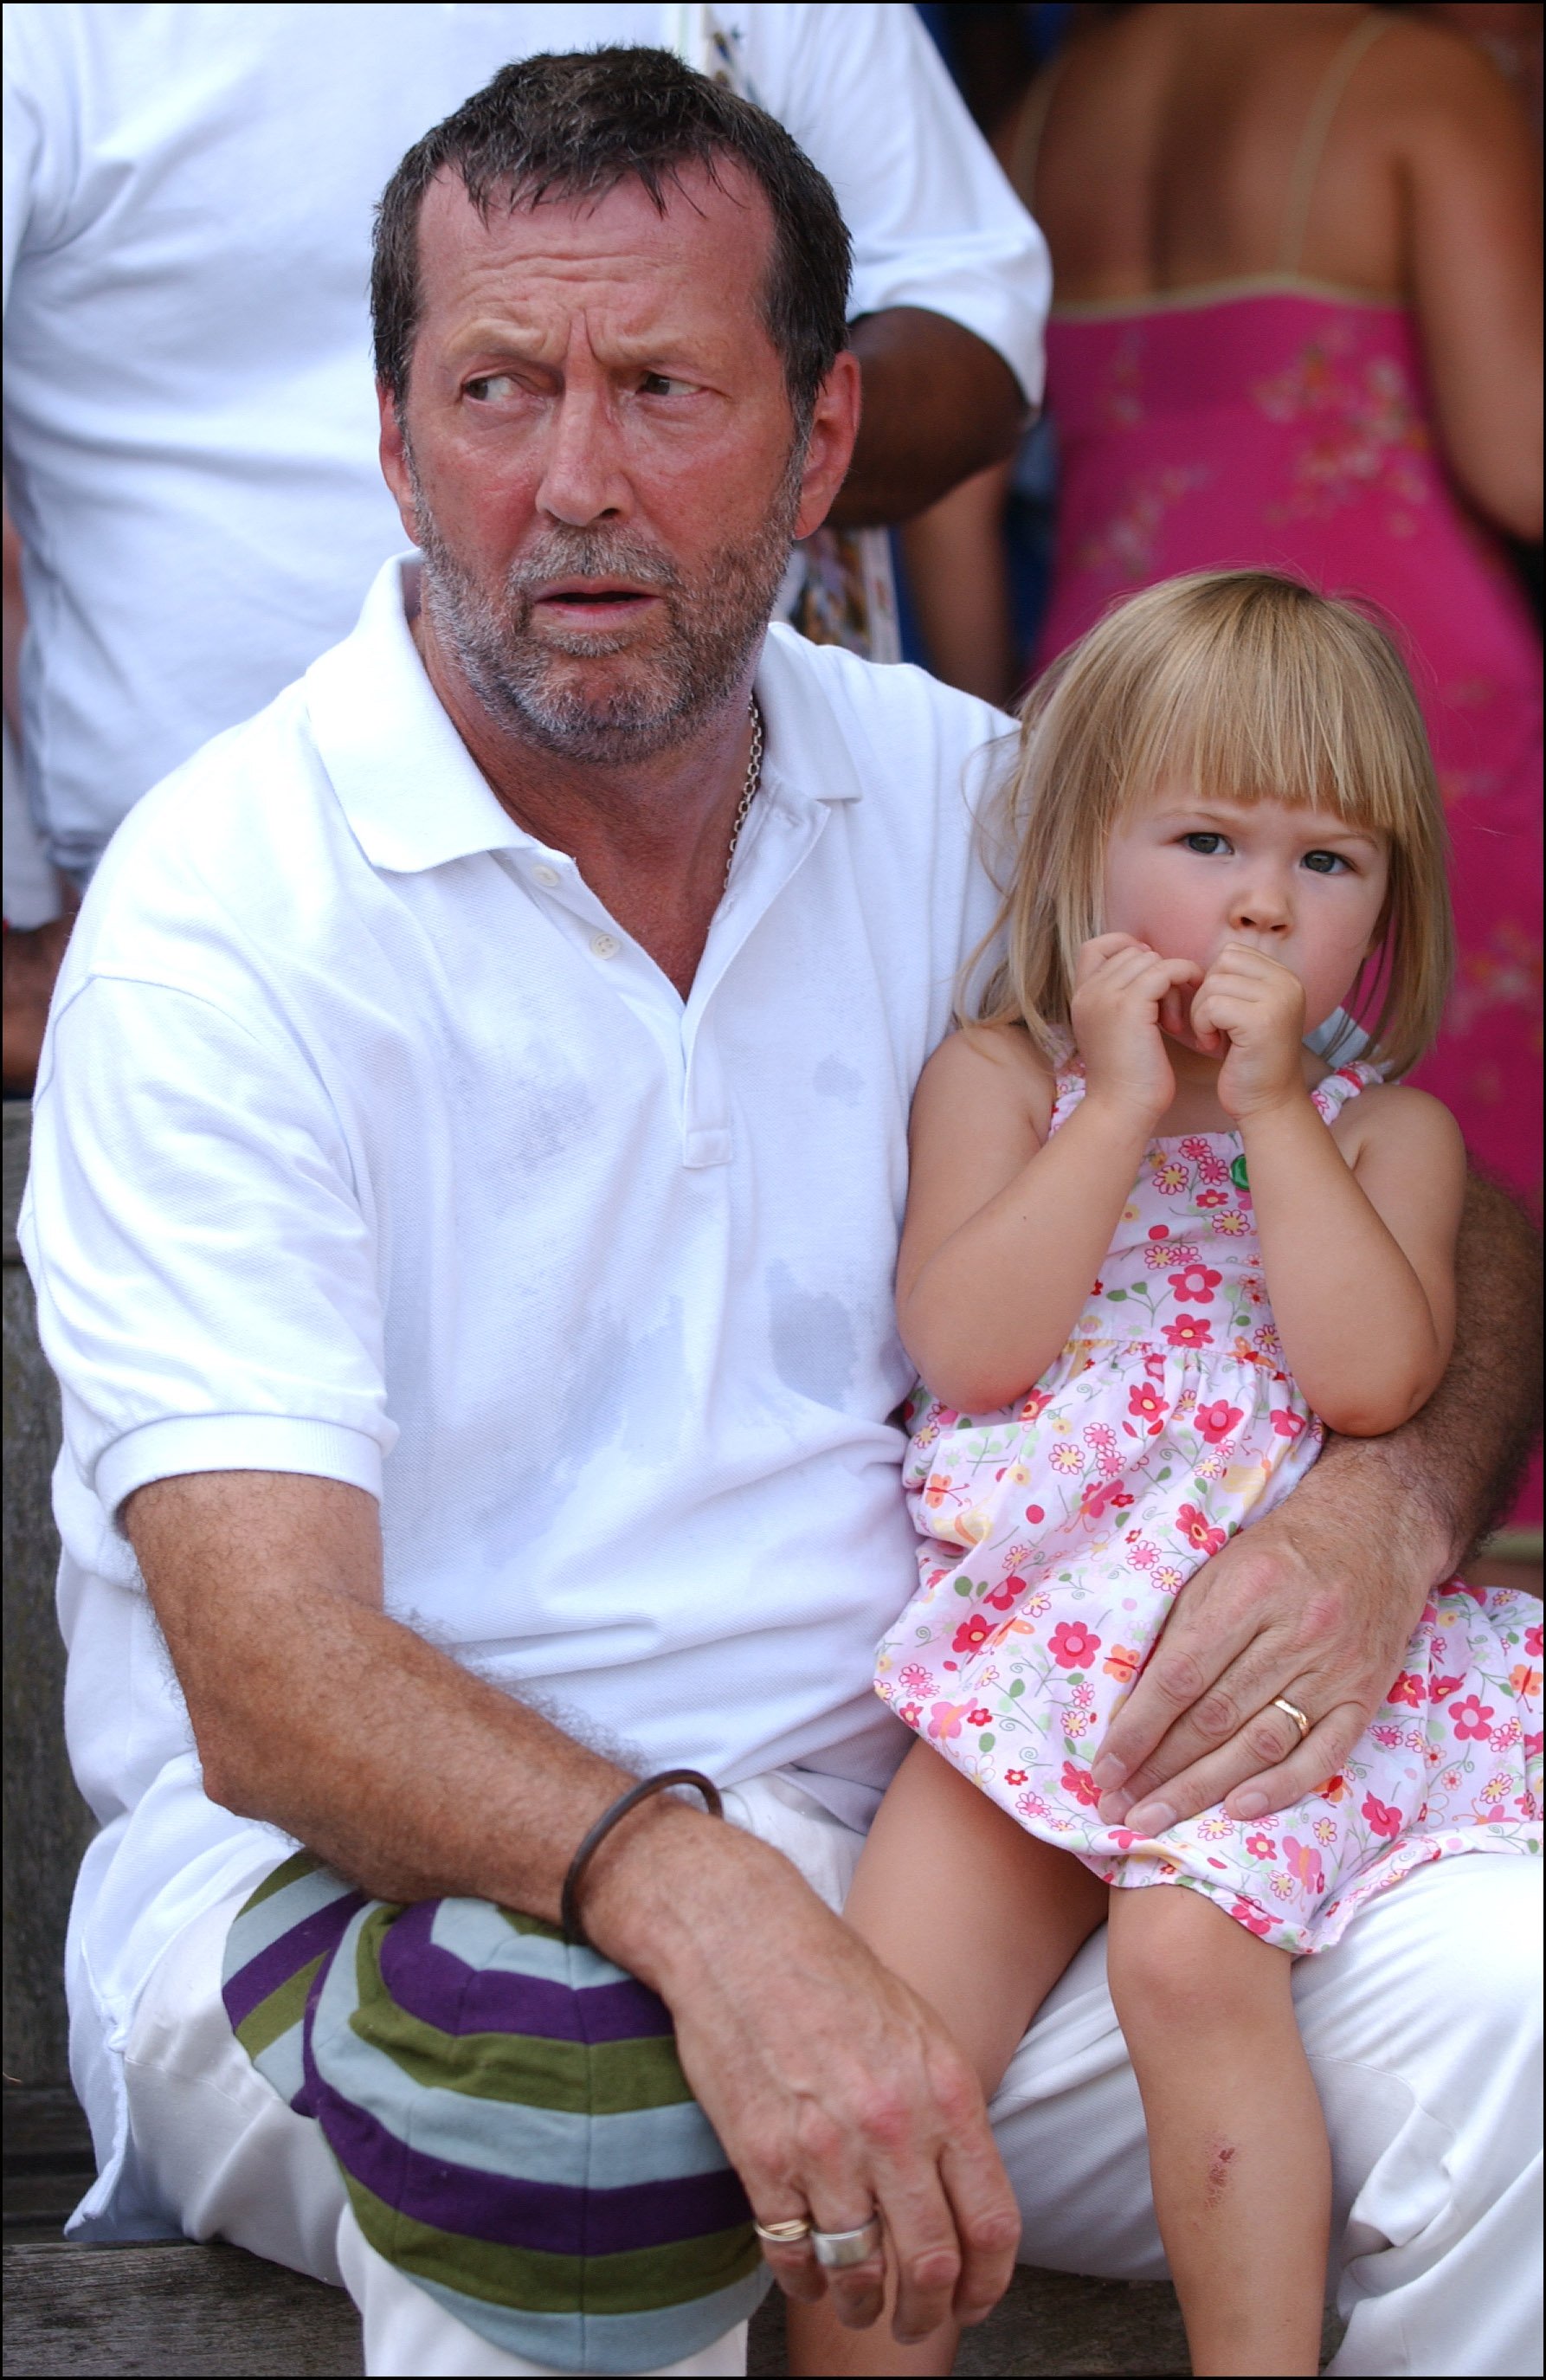 Eric Clapton with his daughter at a Bunbury Cricket Club charity cricket match on August 10 2003. | Source: Getty Images